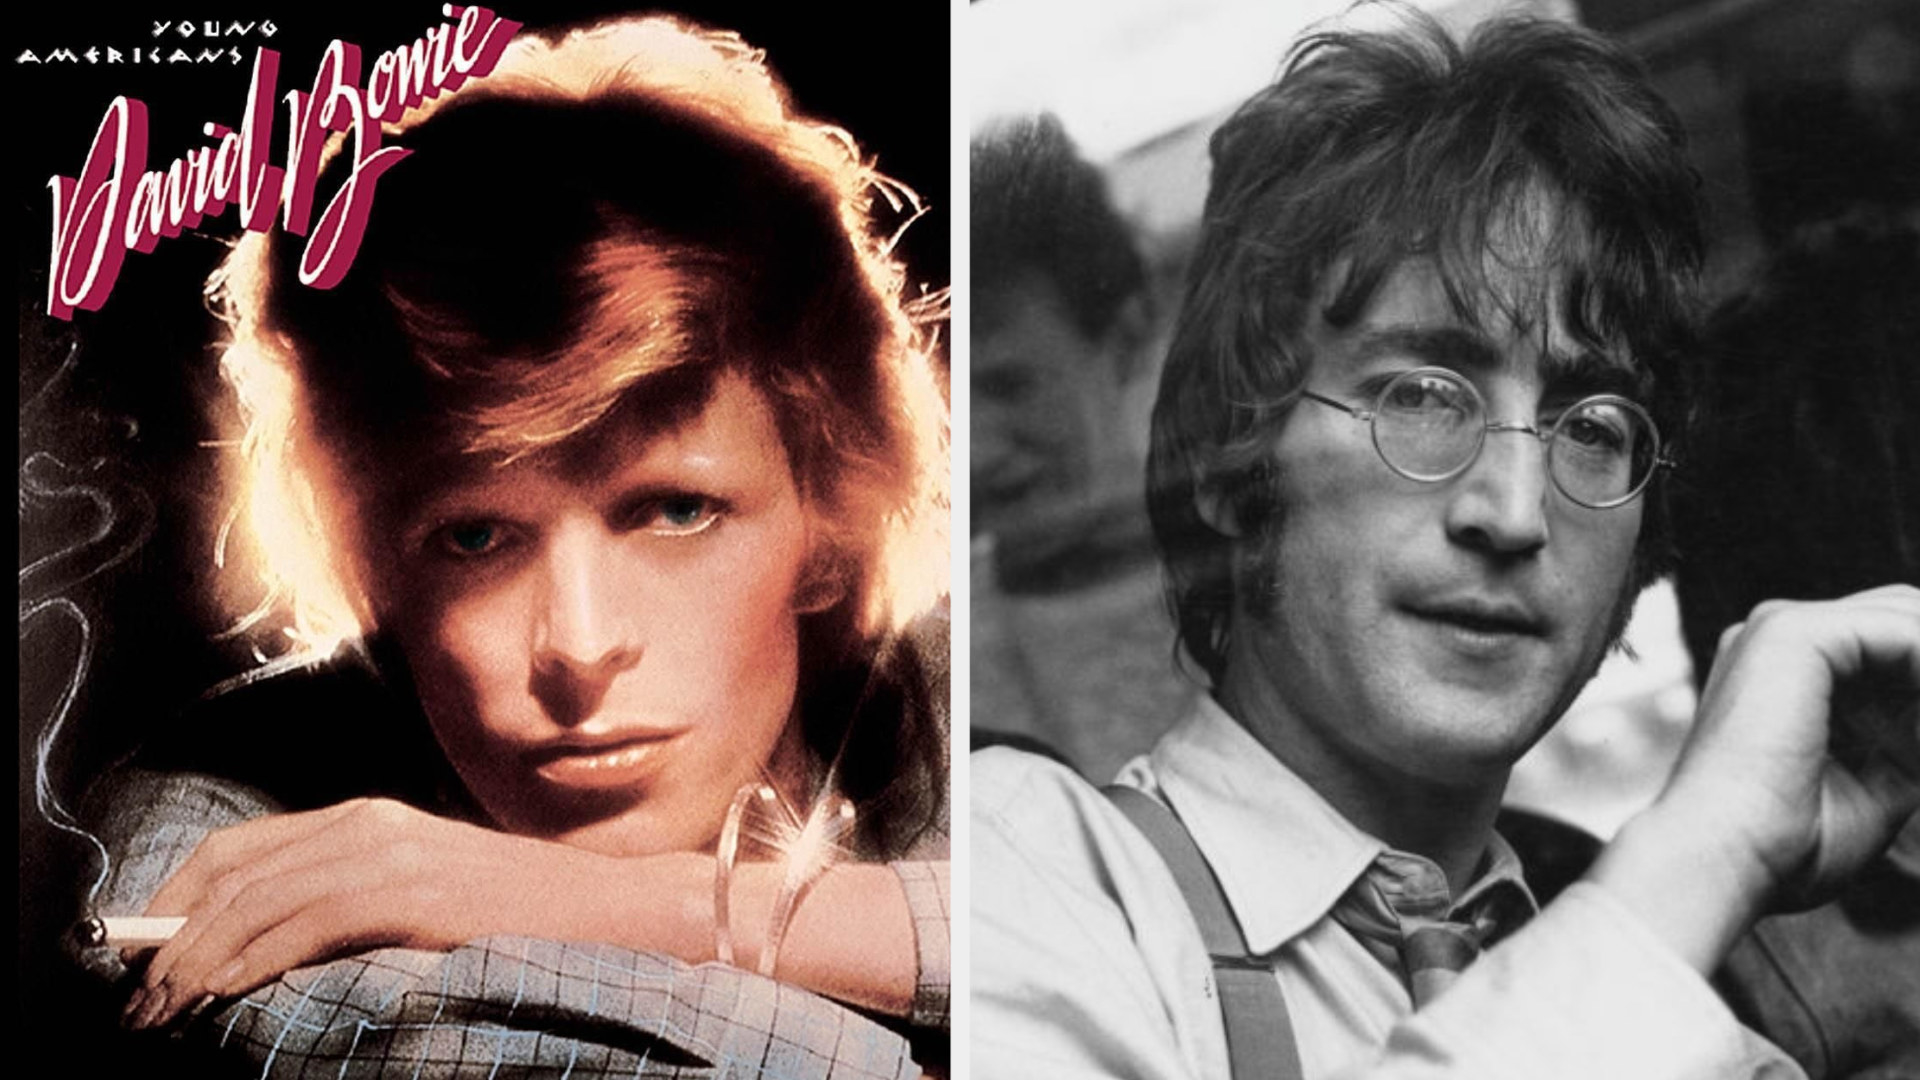 David Bowie&#x27;s album cover for &quot;Young Americans&quot; and John Lennon posing on a bus while wearing glasses